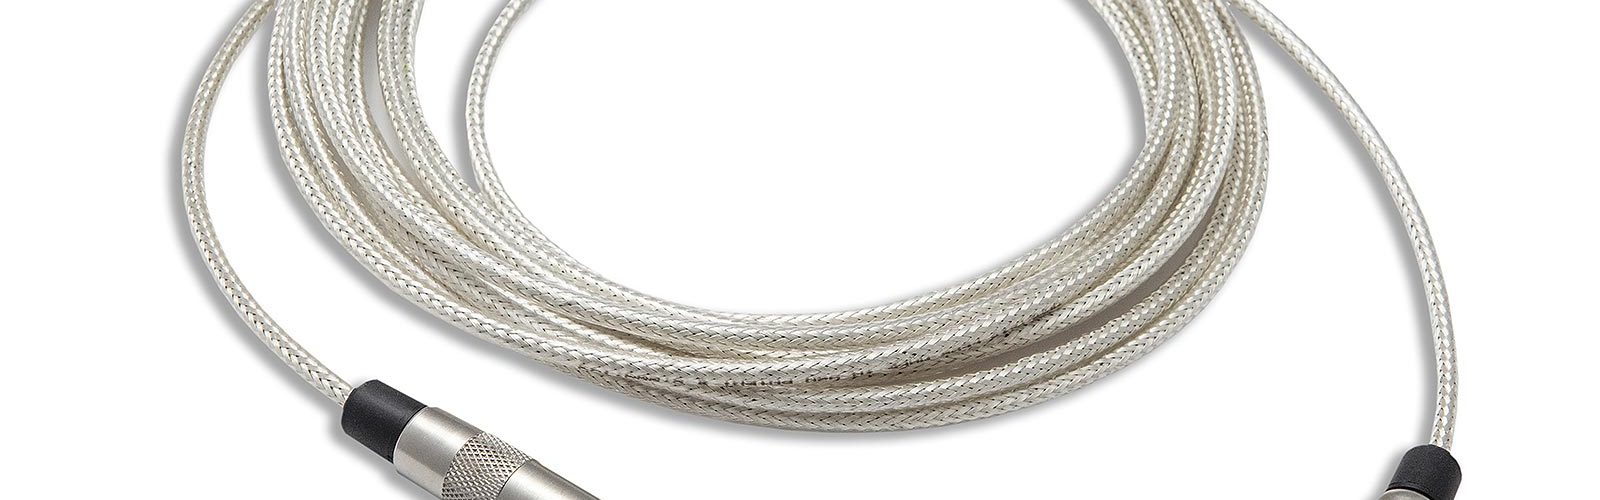 Analysis Plus to Give Away High-end Silver Cables at the Summer NAMM Show